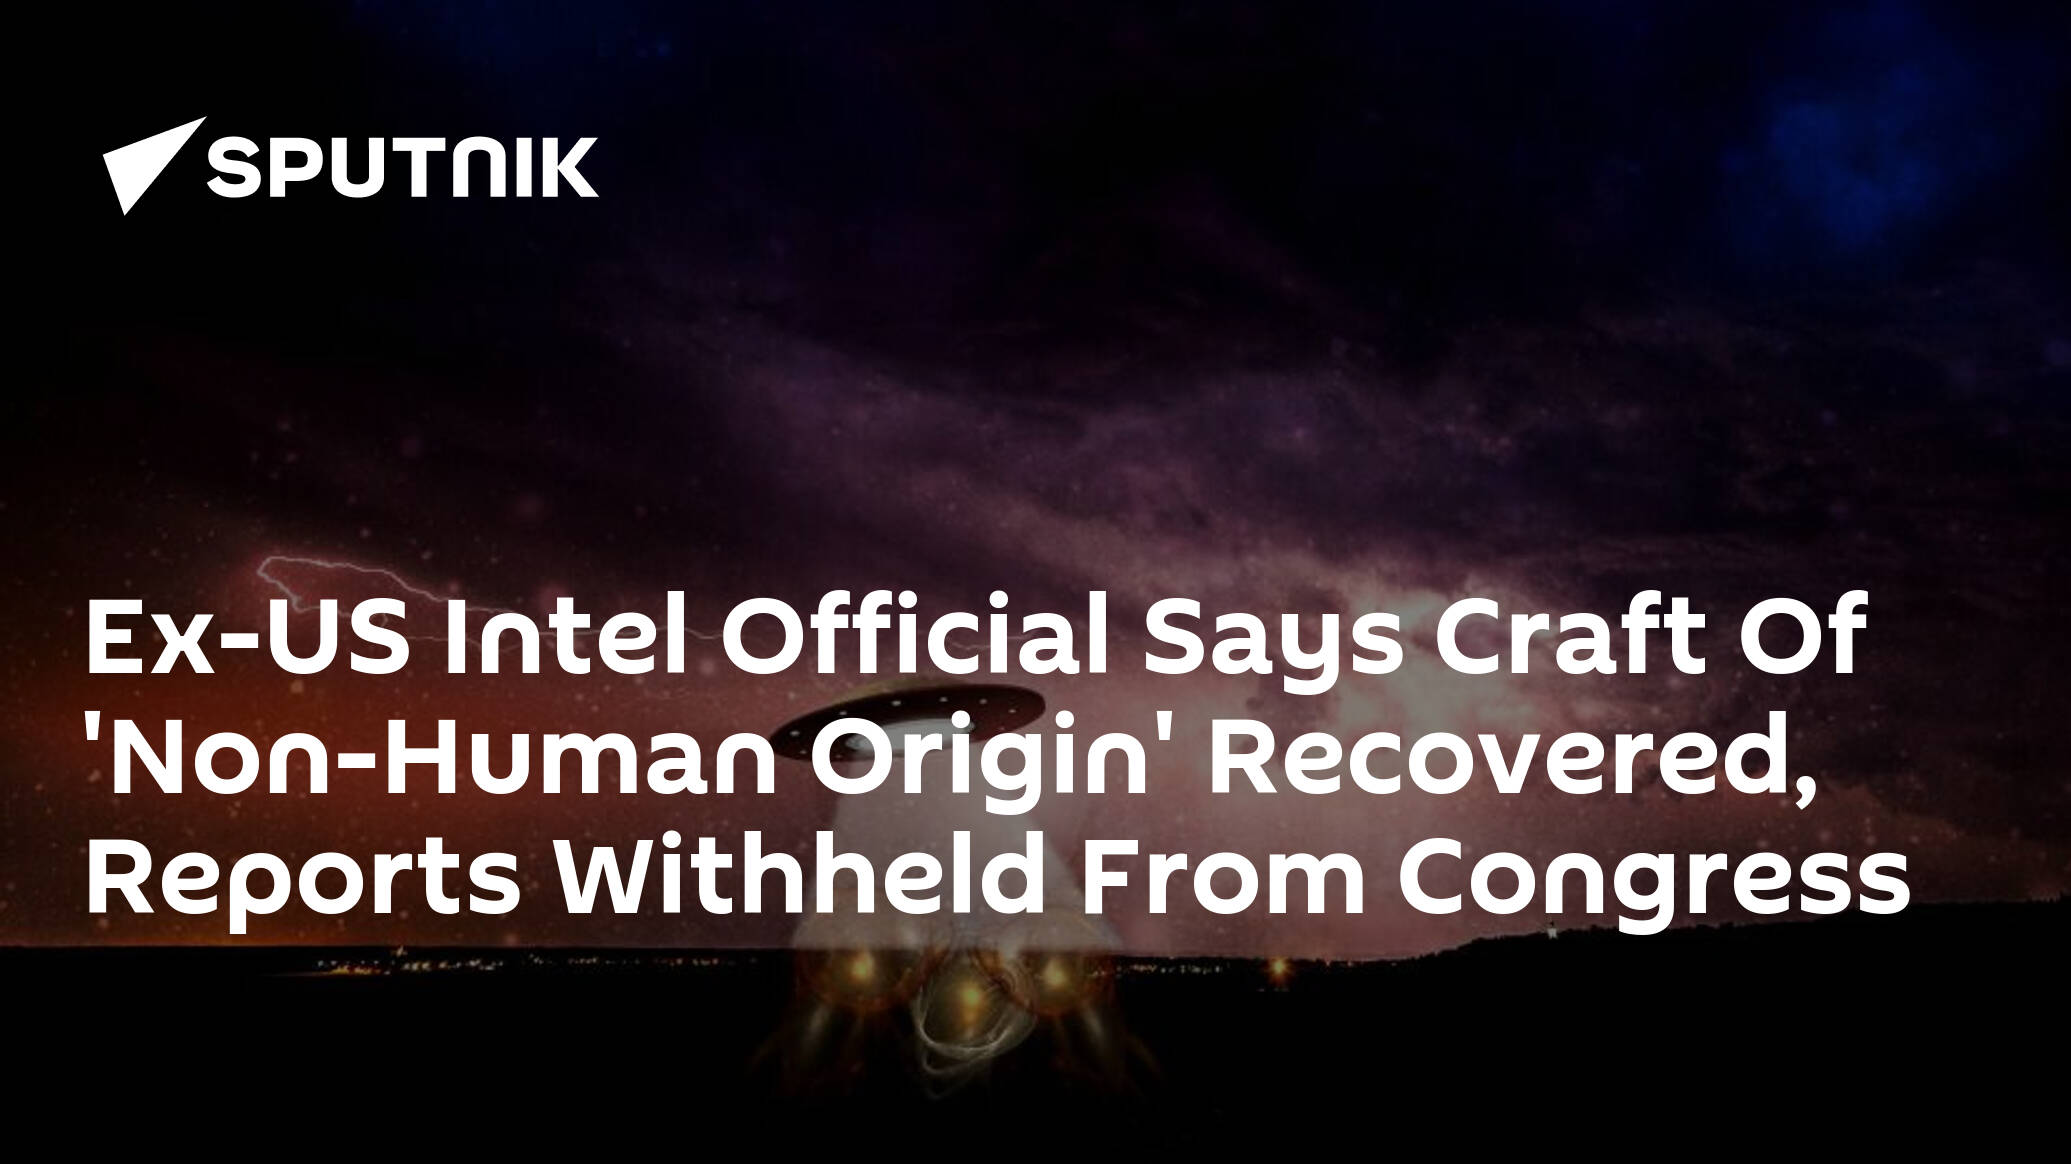 Ex-US Intel Official Says Craft Of 'Non-Human Origin' Recovered, Reports Withheld From Congress